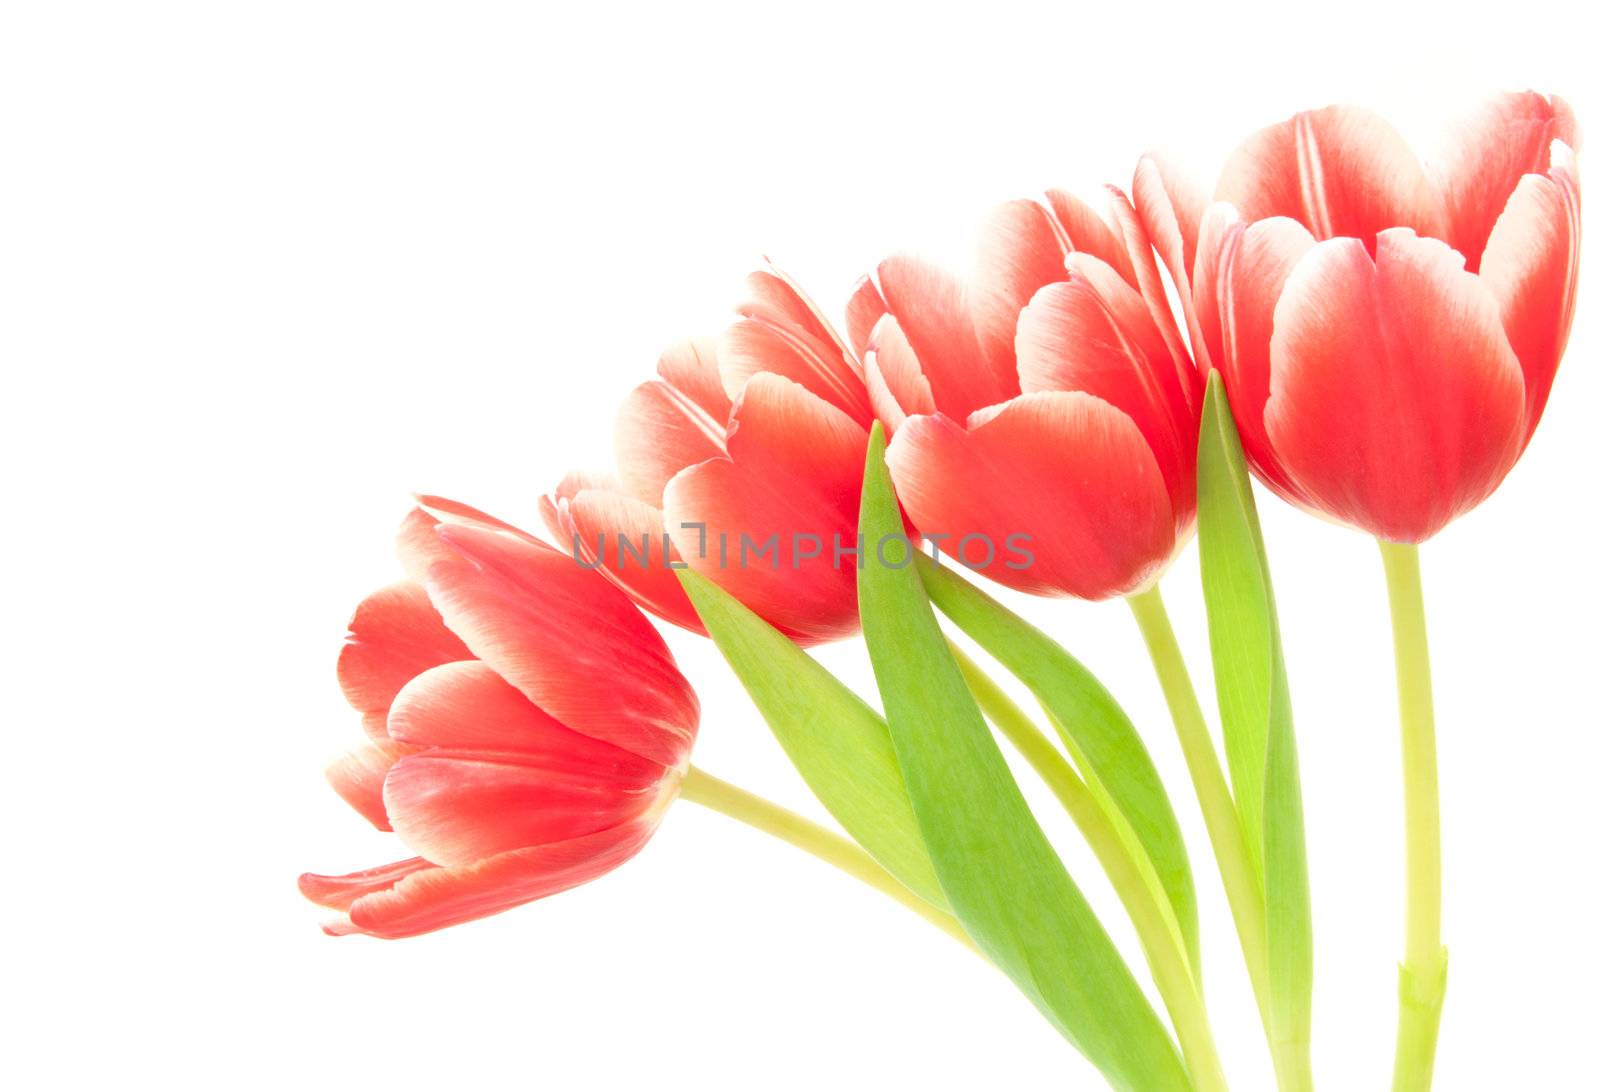 Spring tulips against a white background